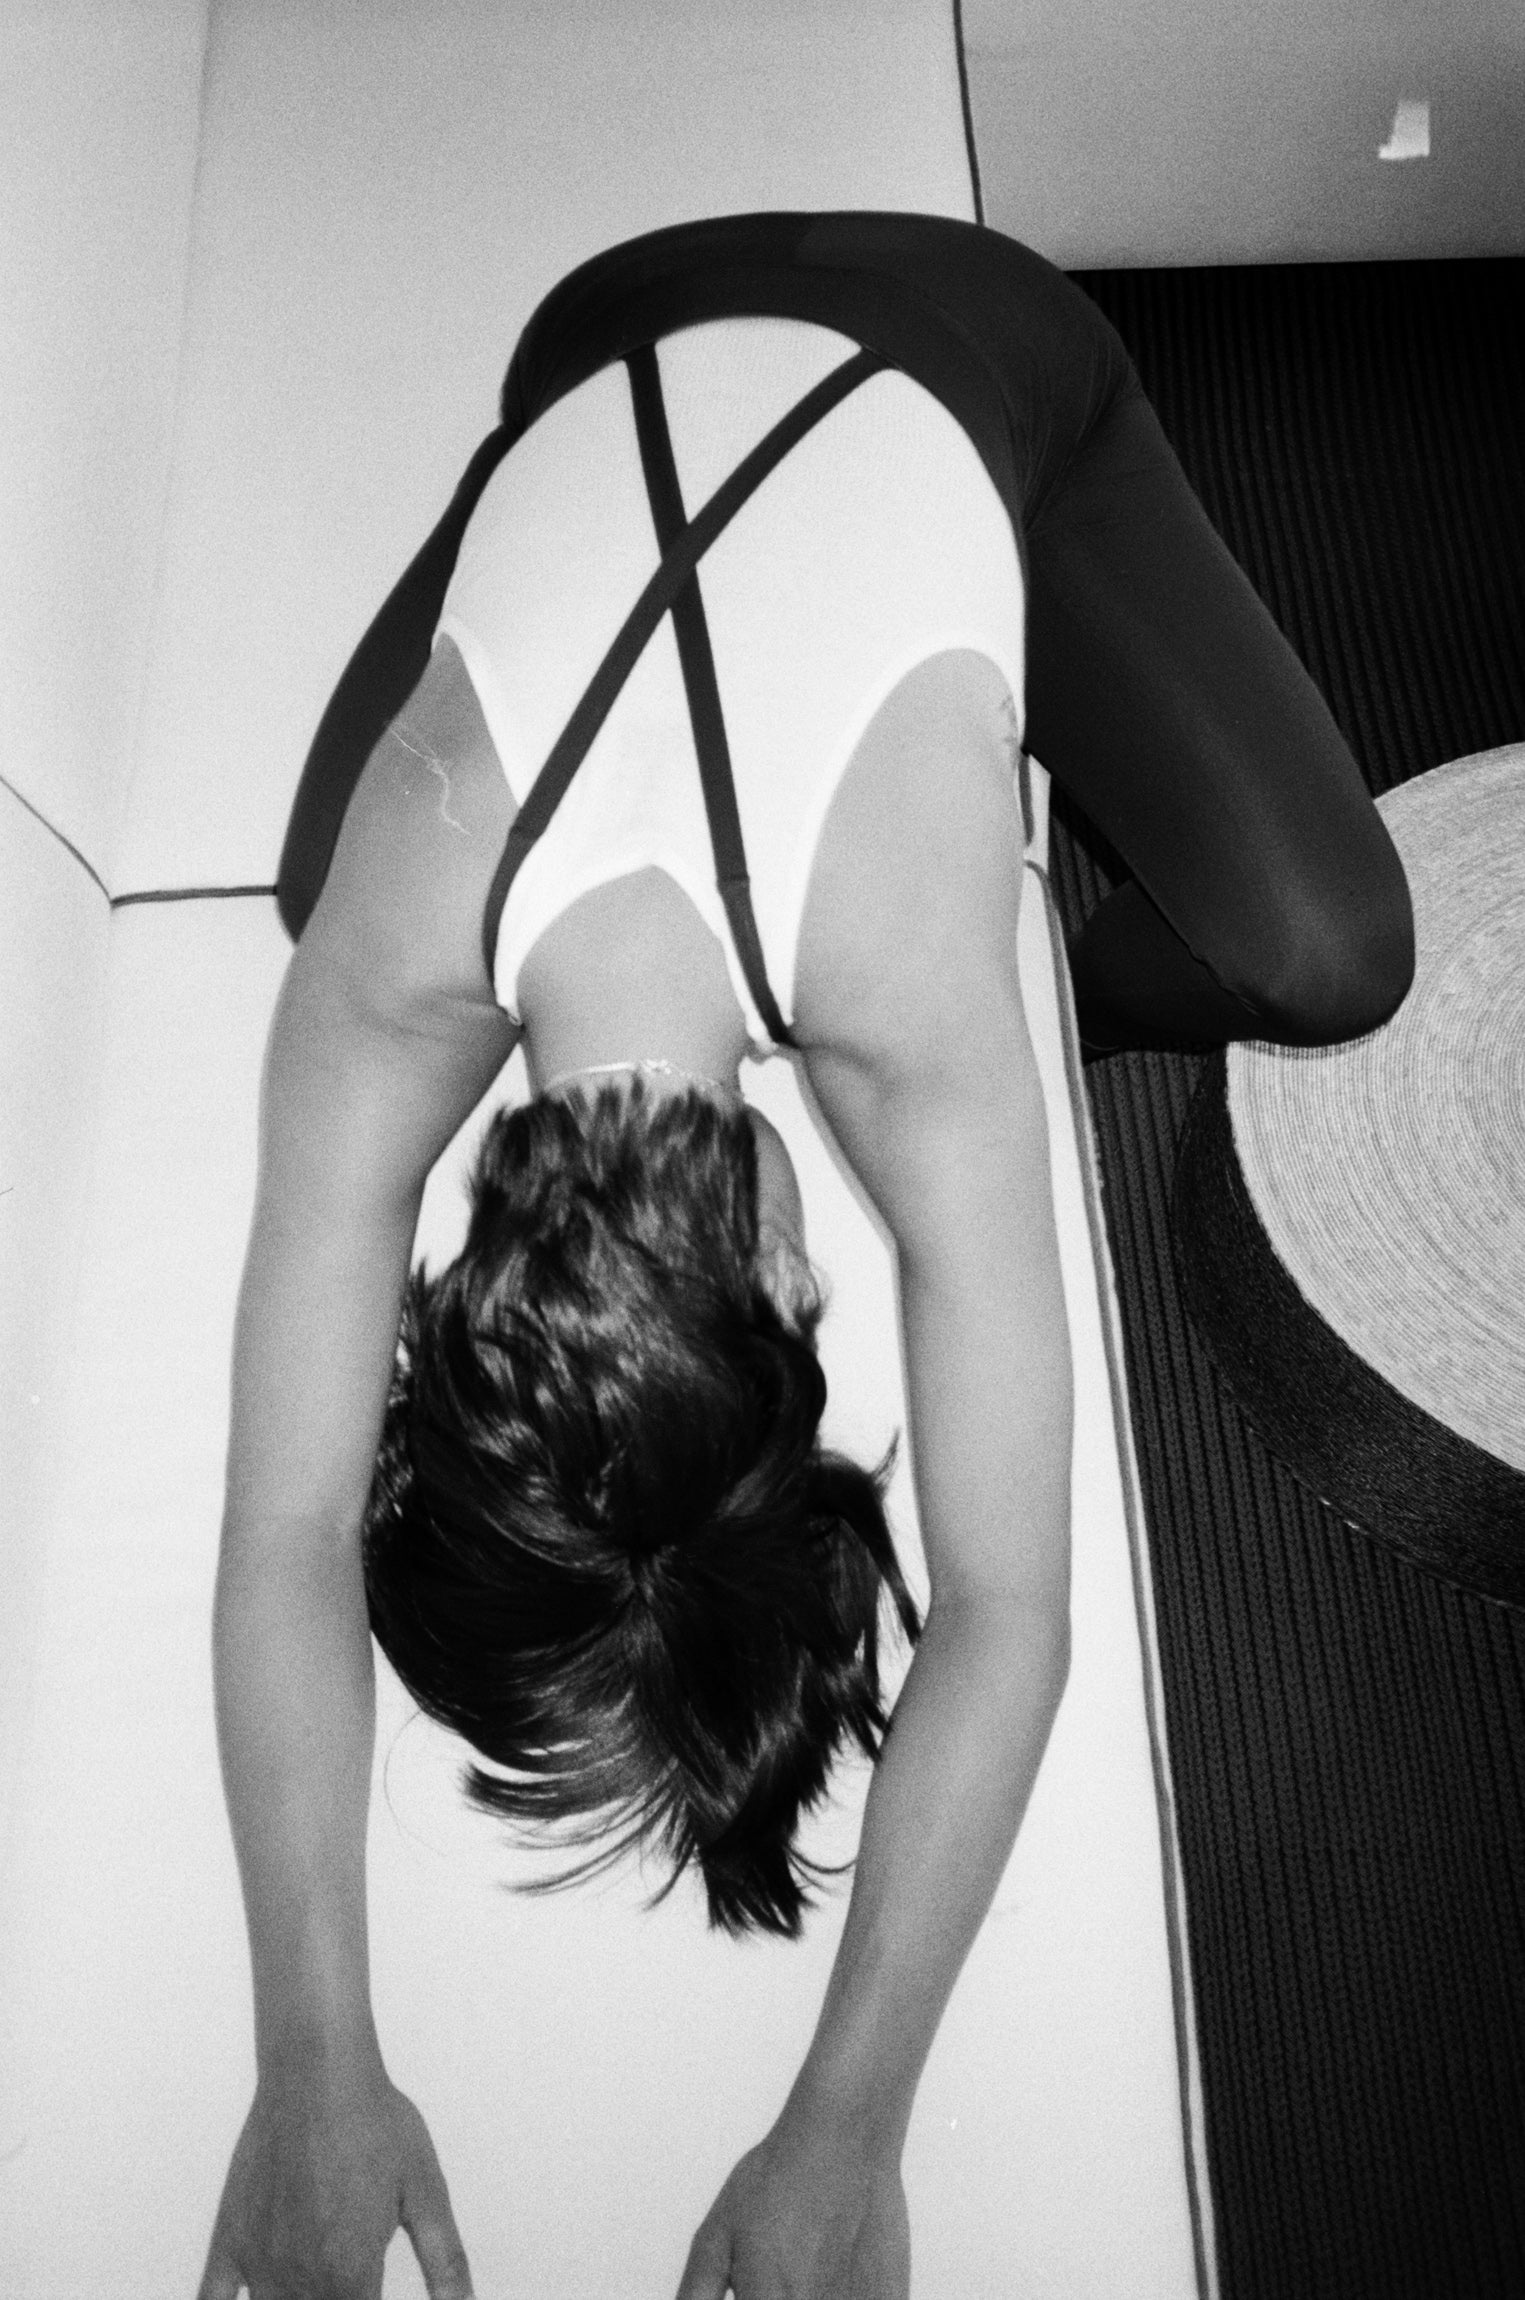 Wear One's At image of model stretching black and white photo